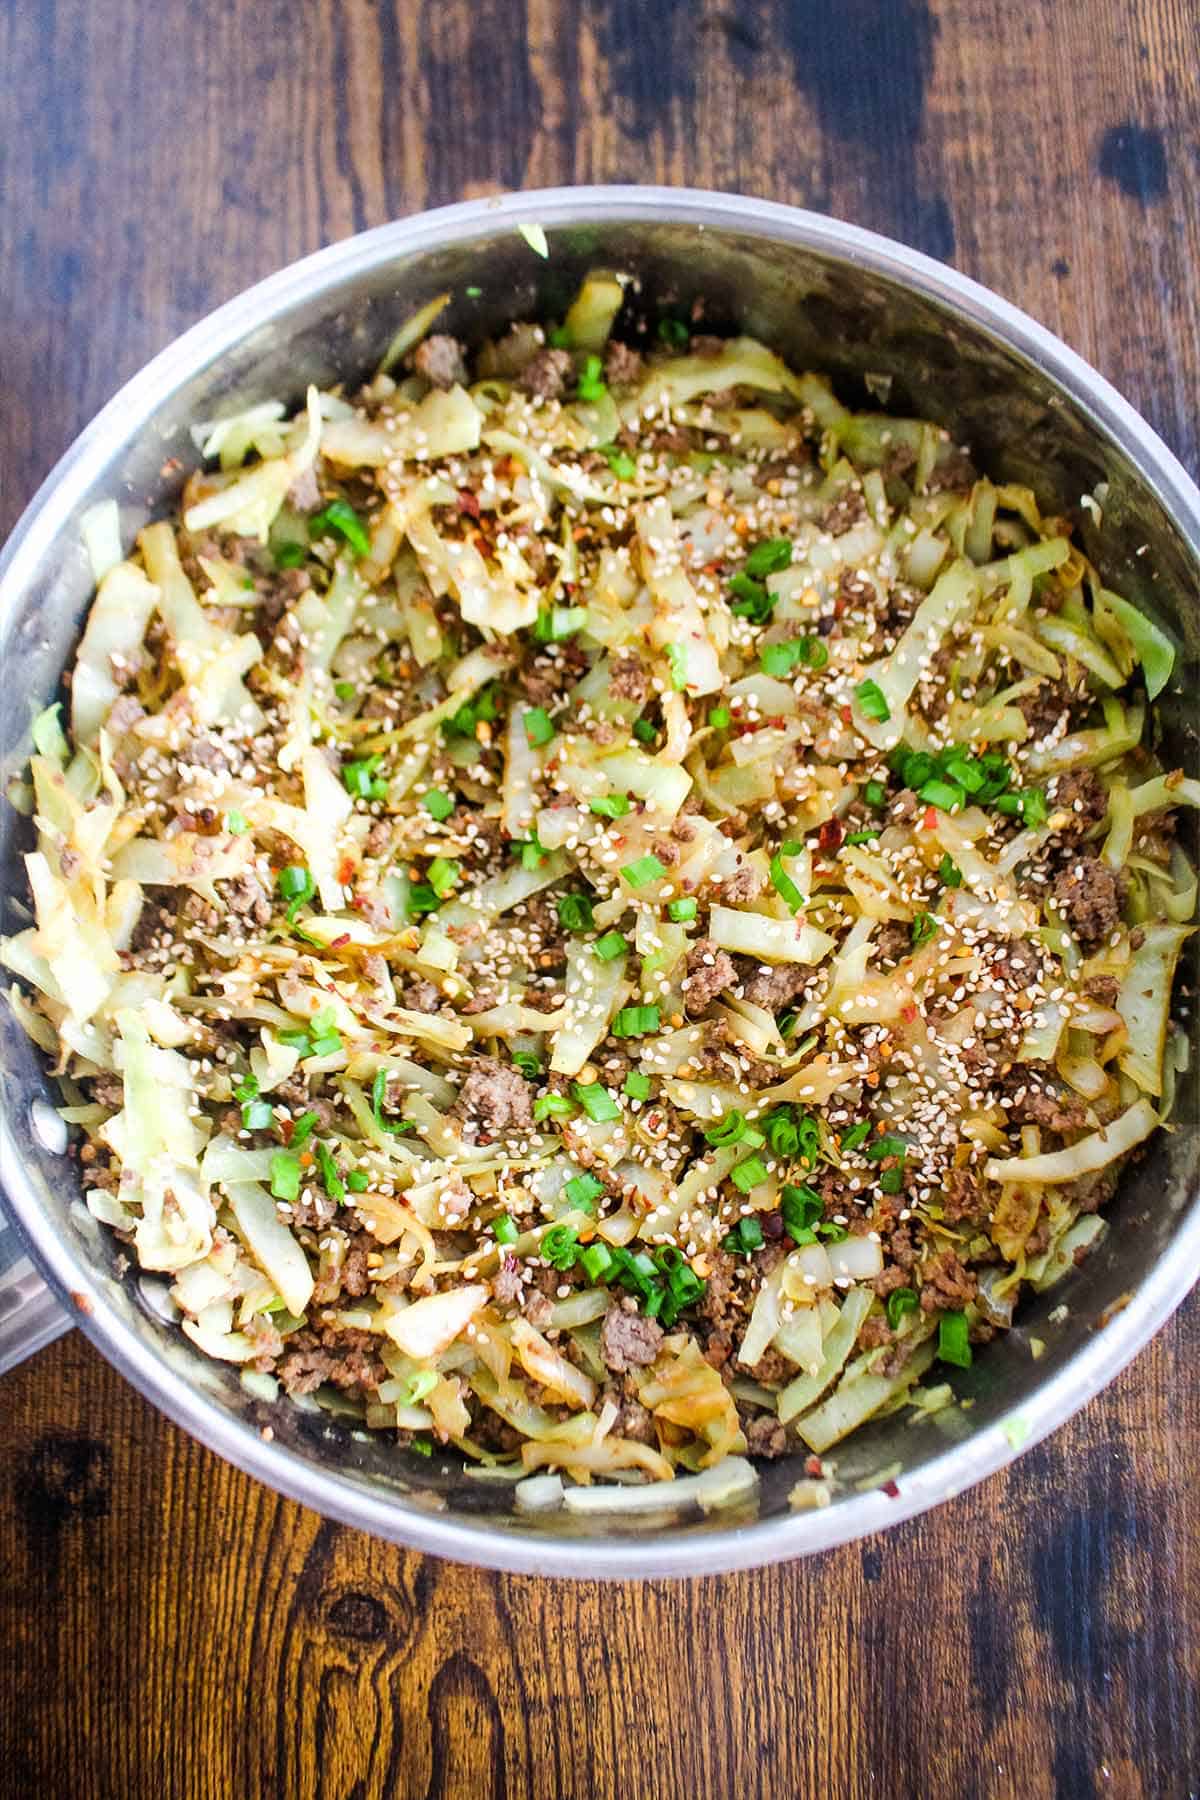 Ground beef and cabbage cooked in a skillet.